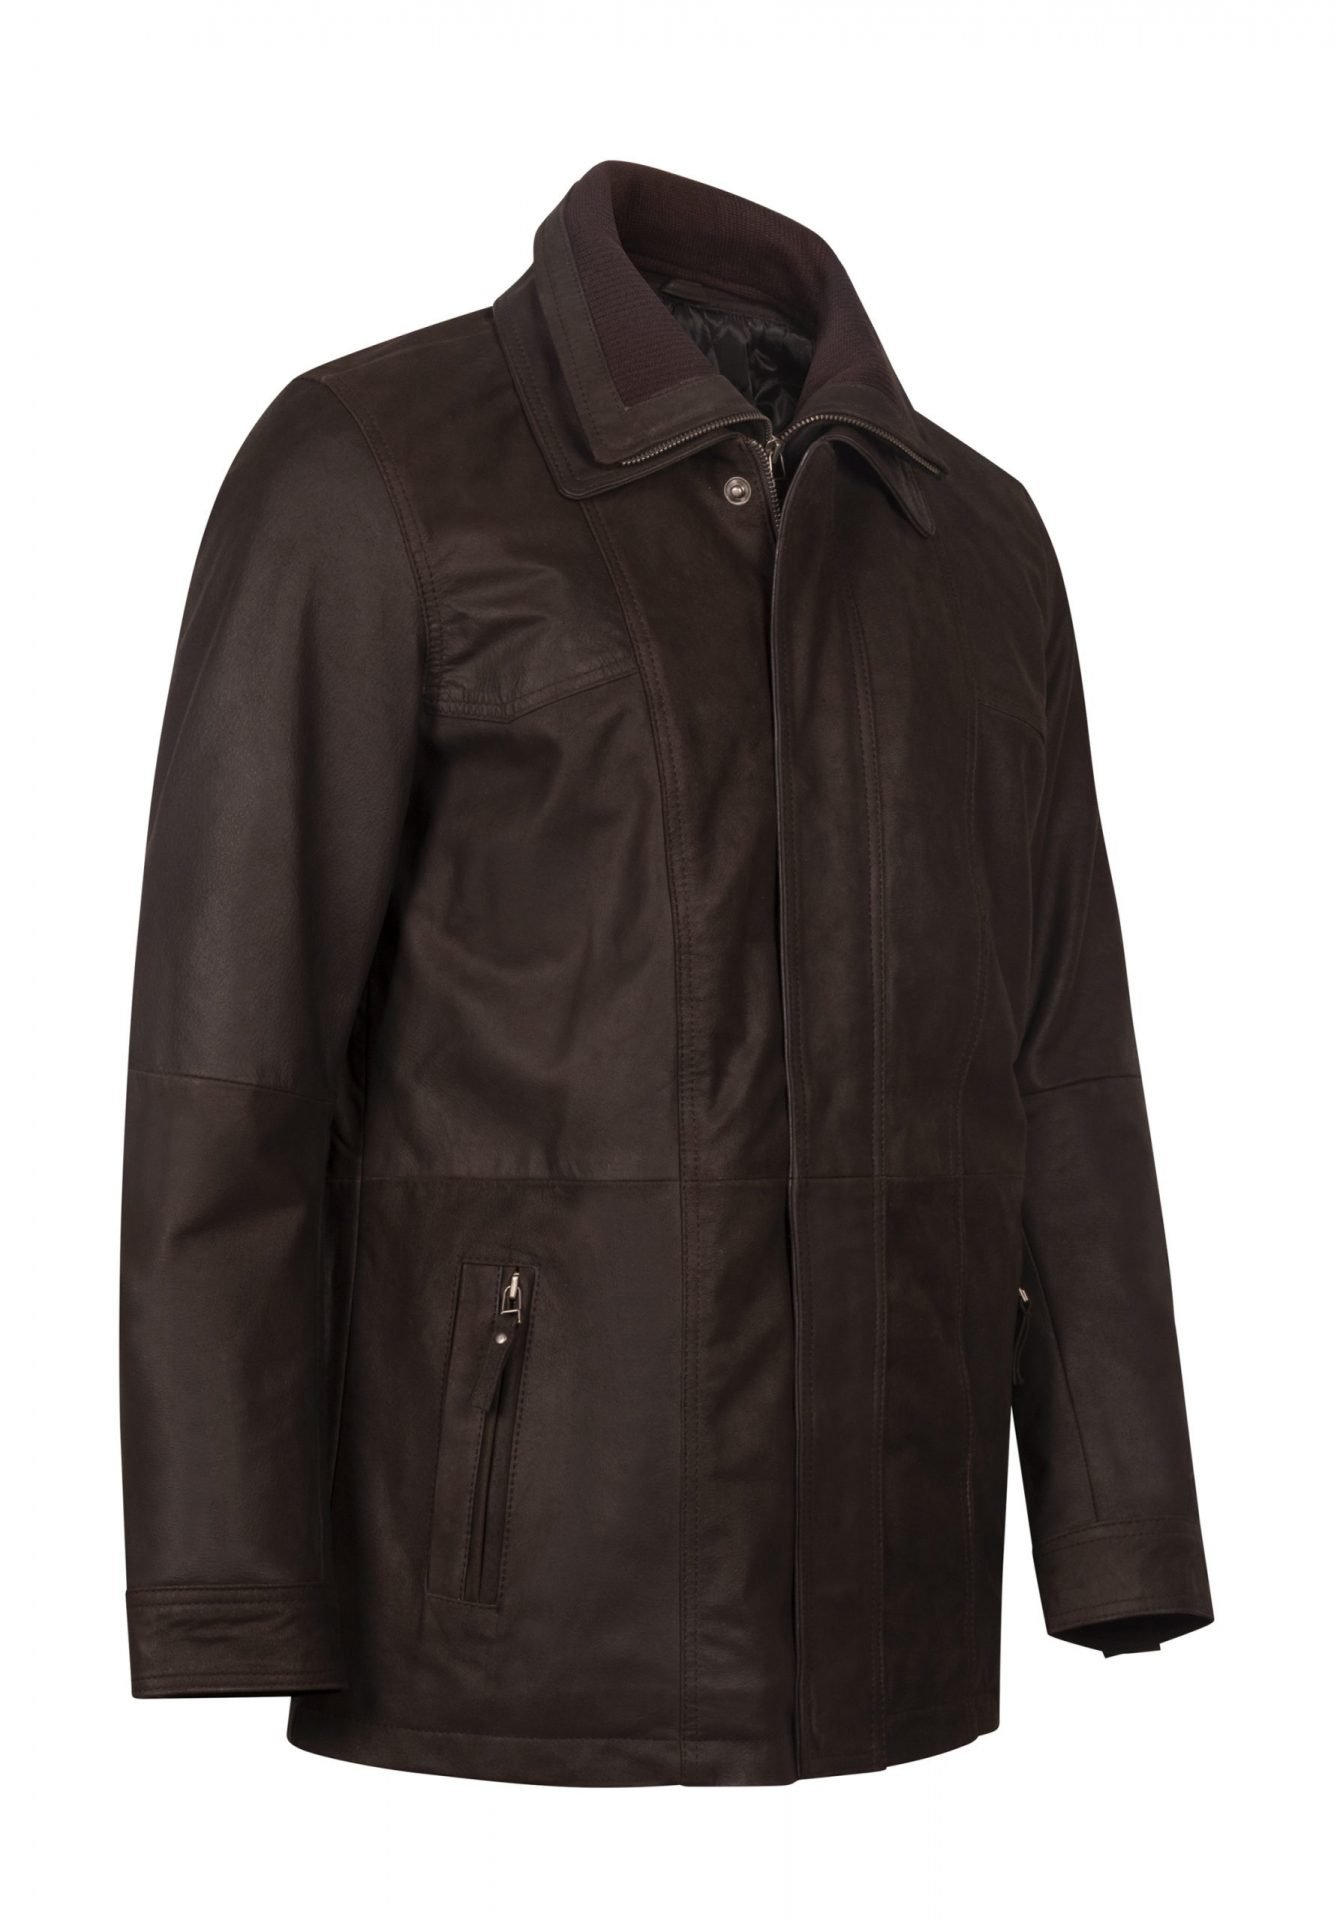 BUFF Brown Leather Parka Strong Leather